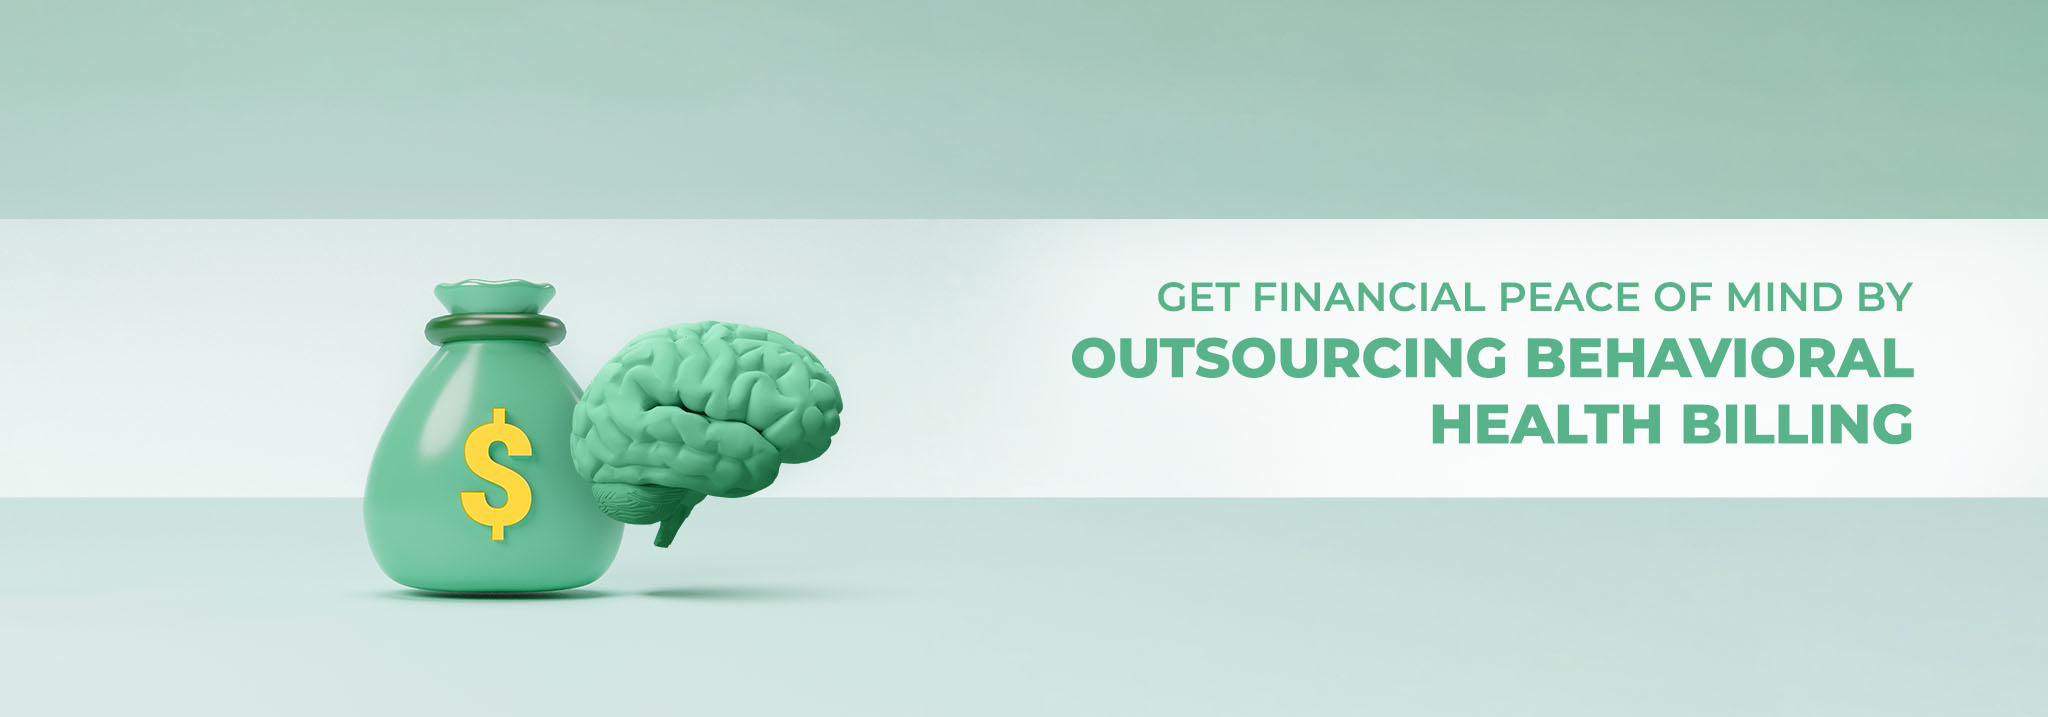 How Outsourcing Behavioral Health Billing